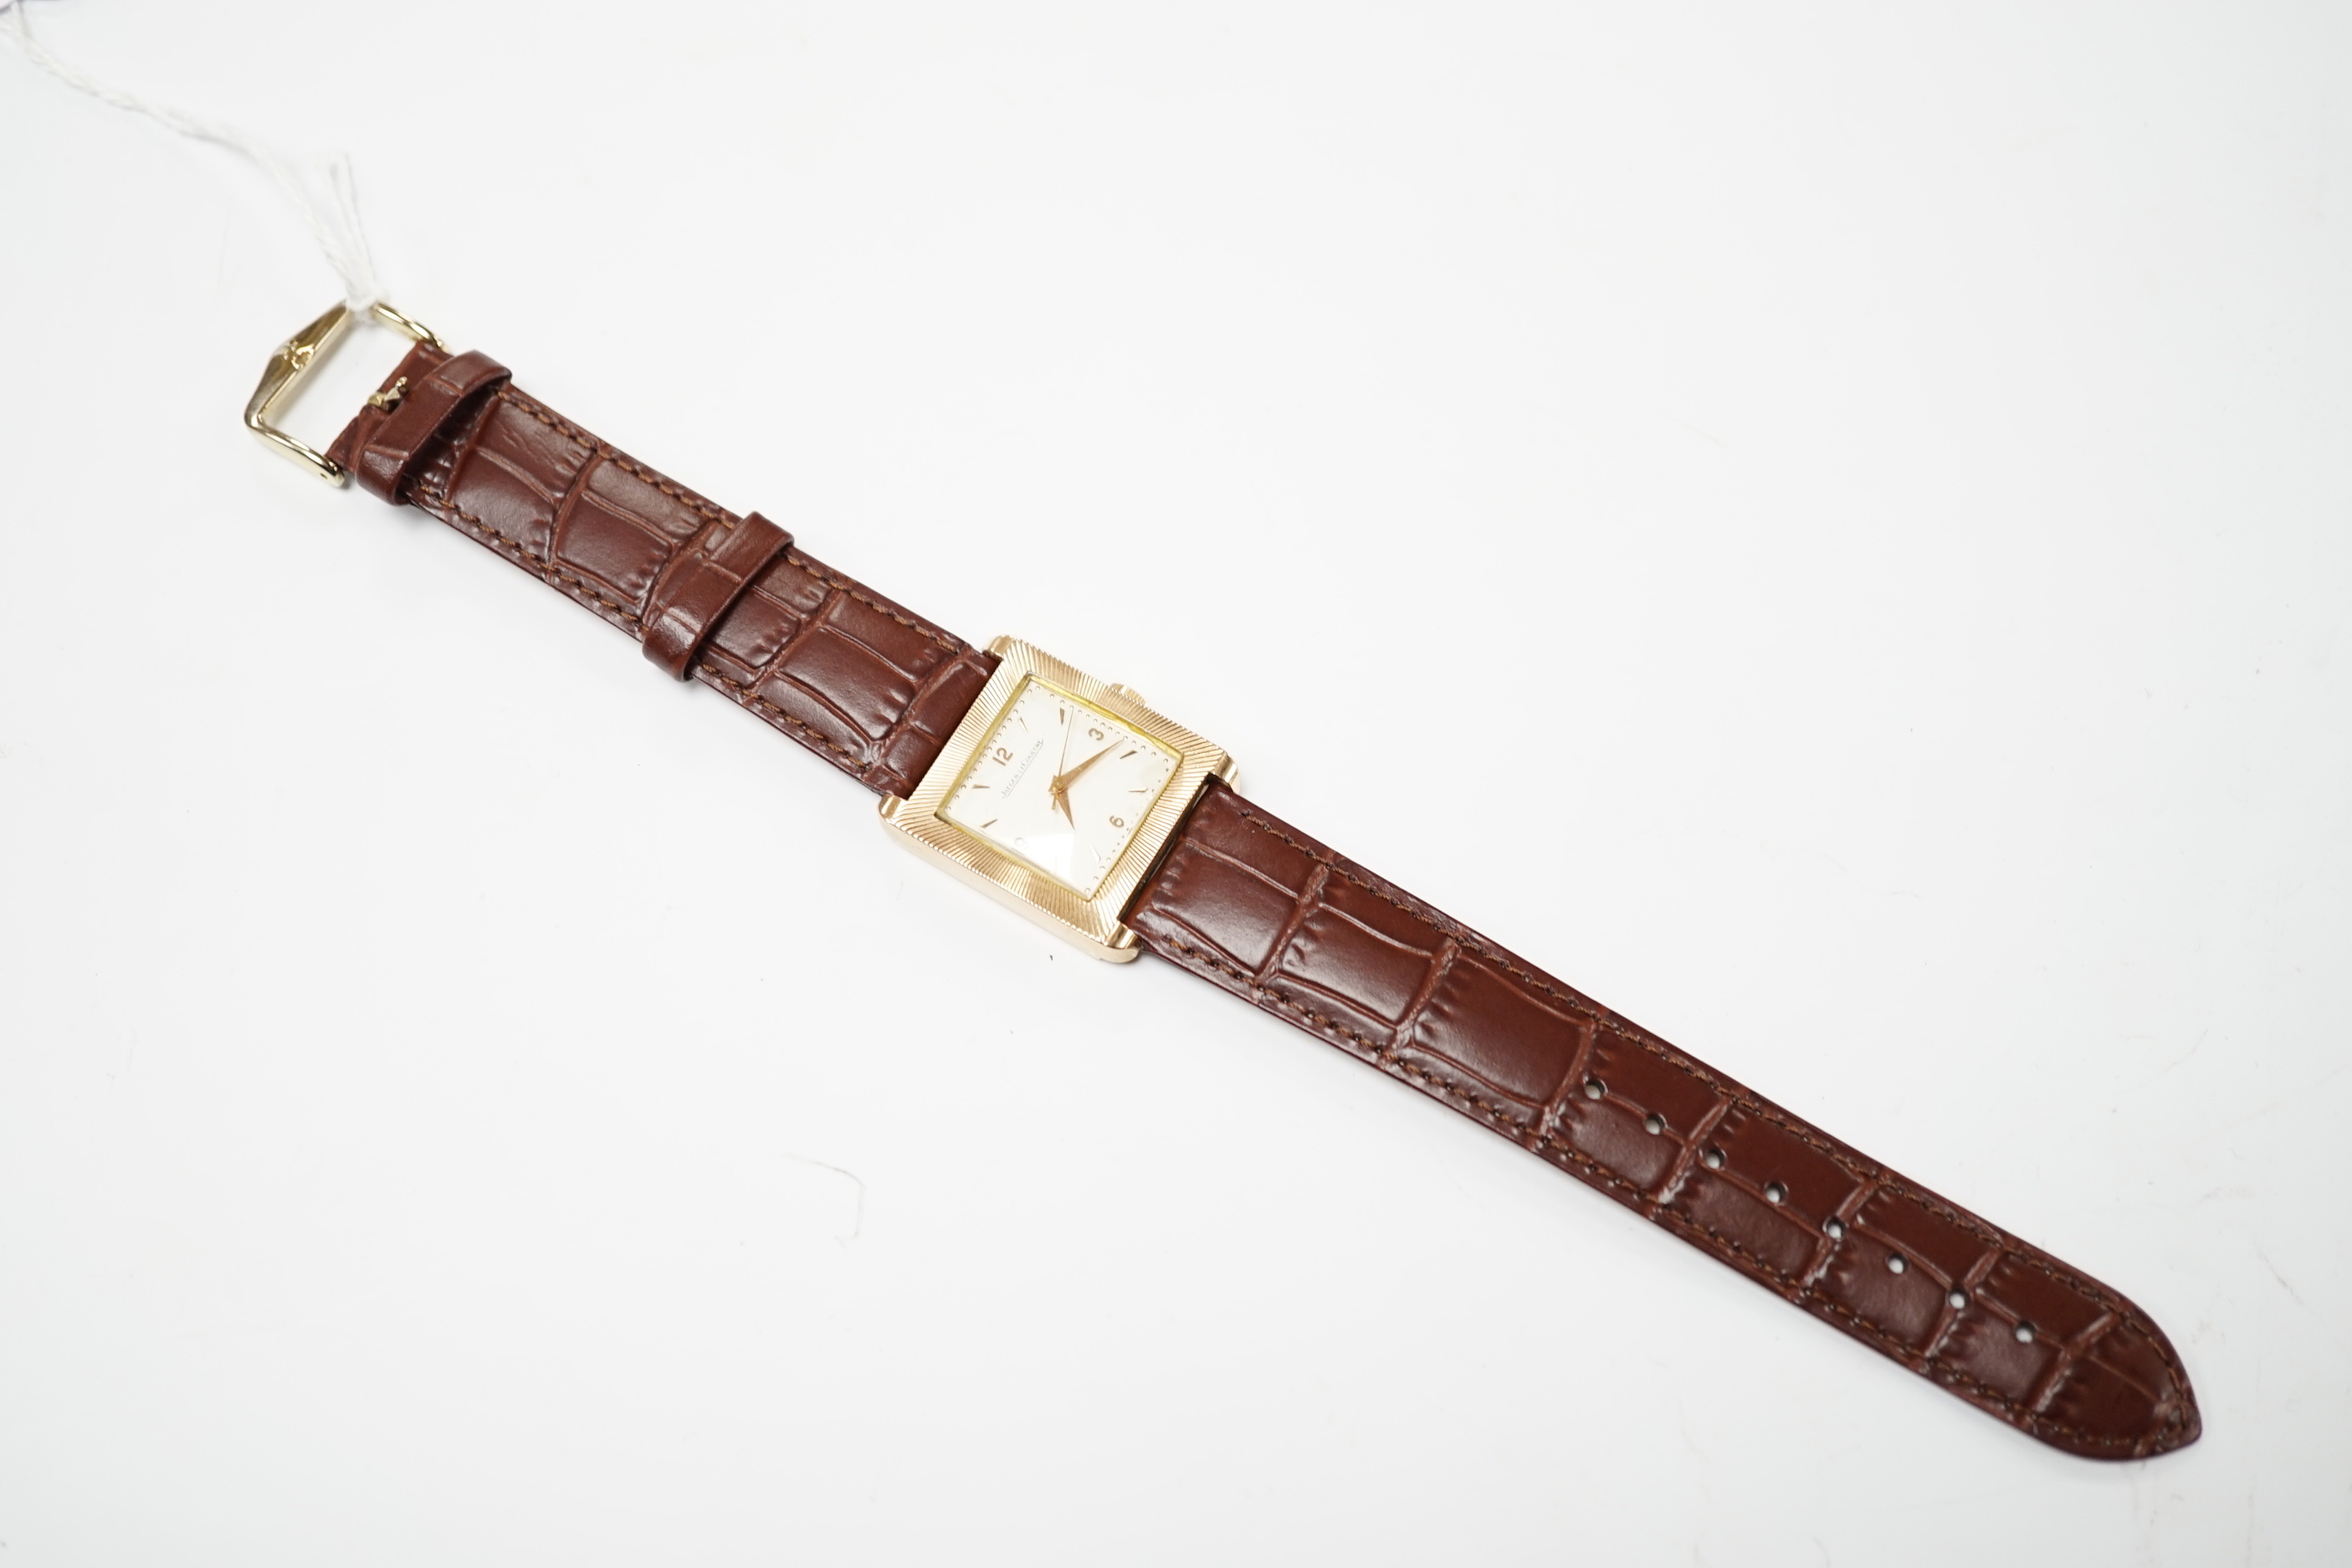 A gentleman's 18ct gold Jaeger LeCoultre manual wind dress wrist watch, with square dial, milled bezel and baton and quarterly Arabic numerals, on associated leather strap, case diameter 26mm, gross weight 31.8 grams.